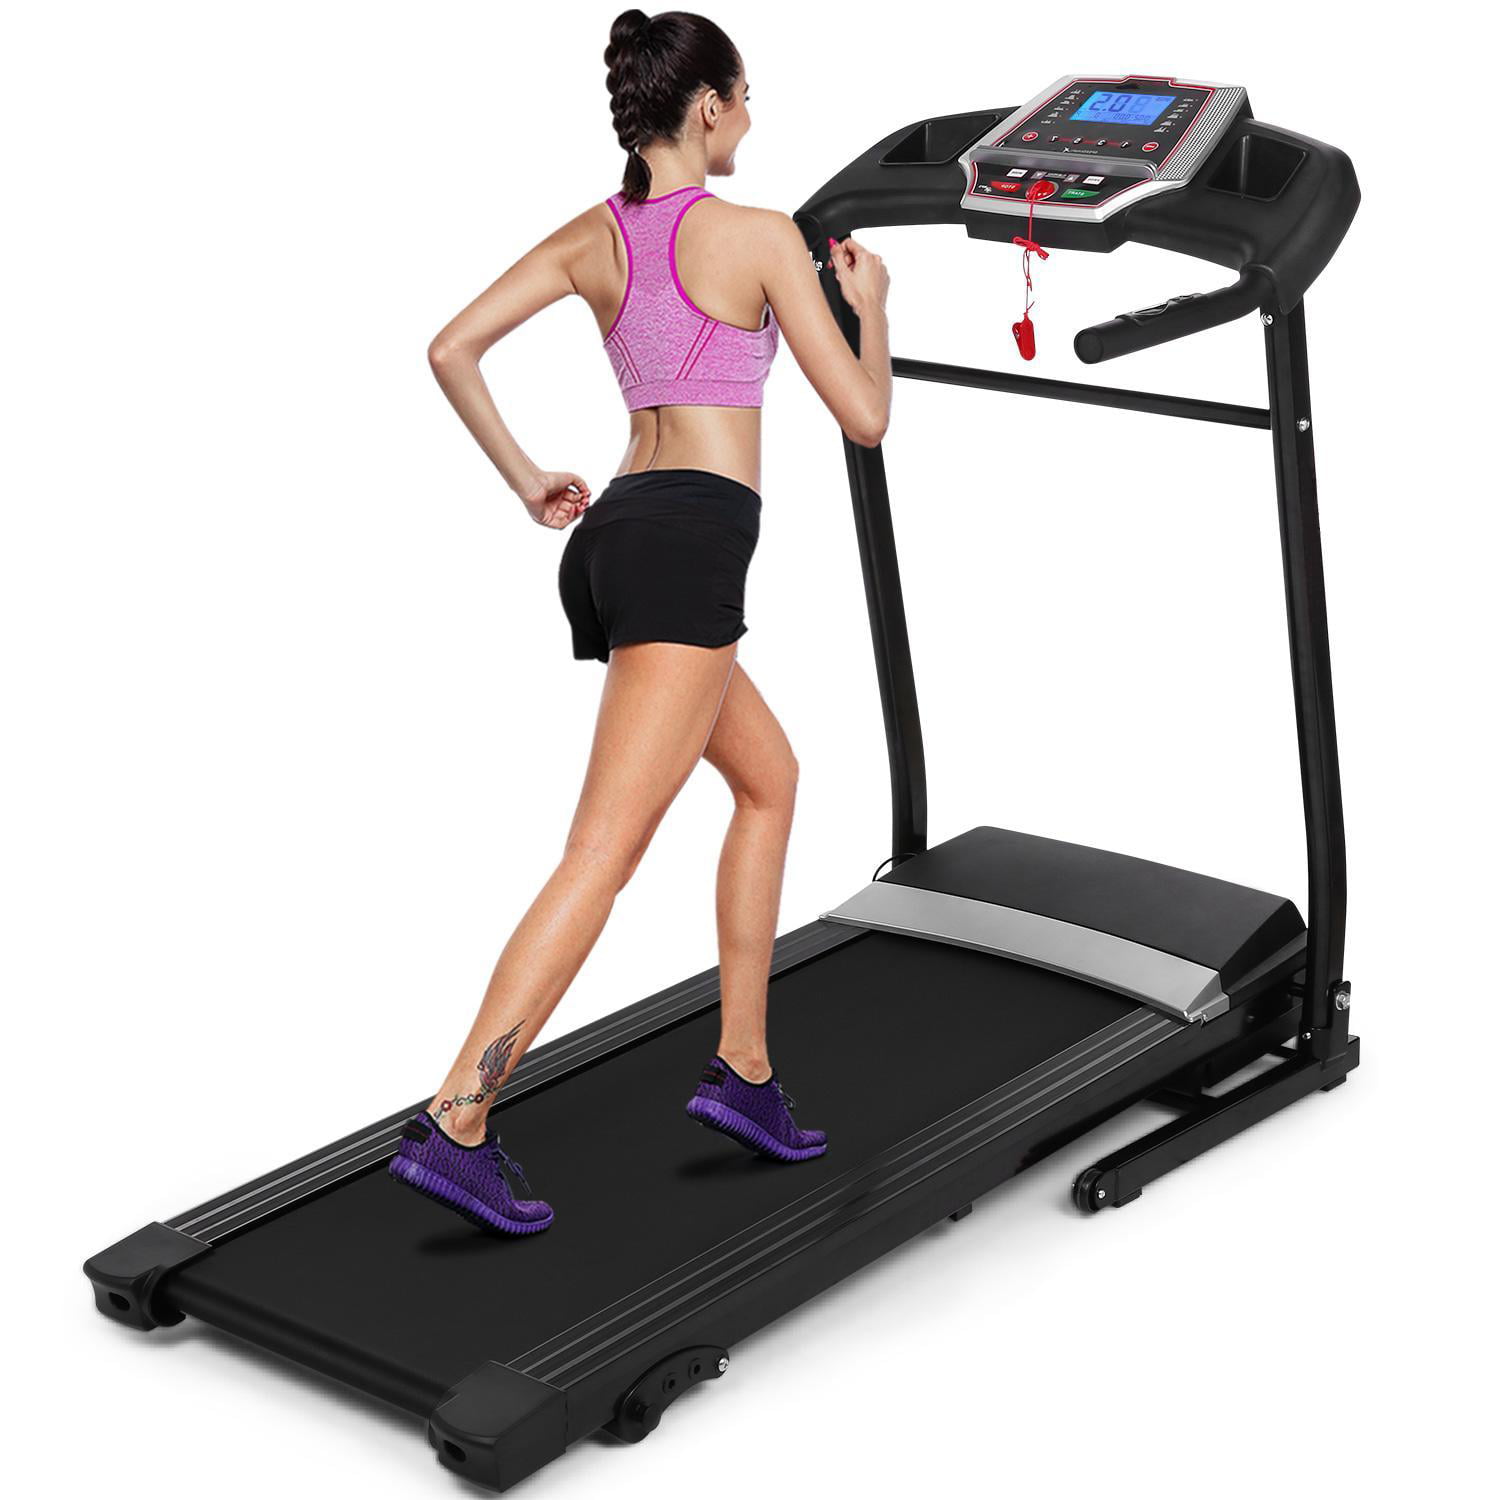 What To Look For When Picking The Very Best Home Treadmill – Treadmills